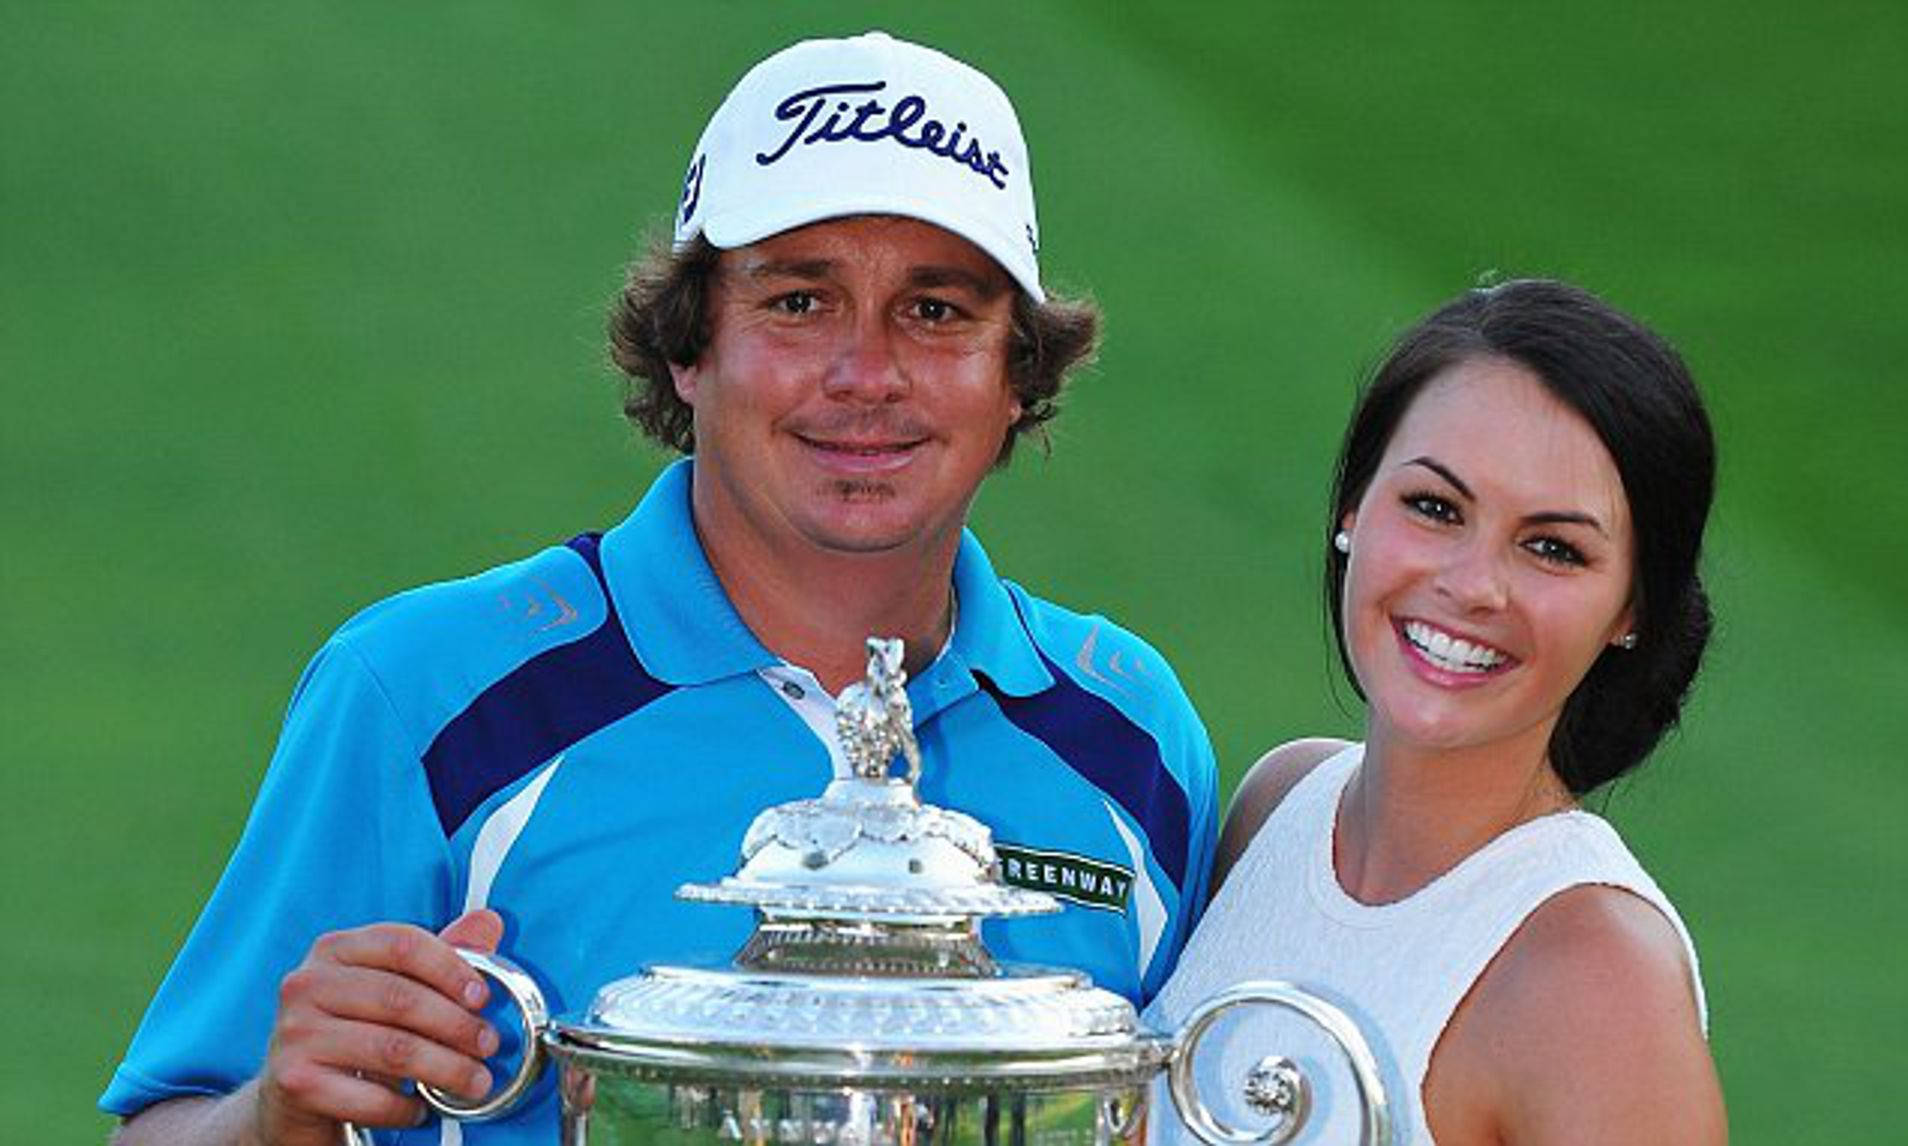 Jason Dufner With Wife Wallpaper